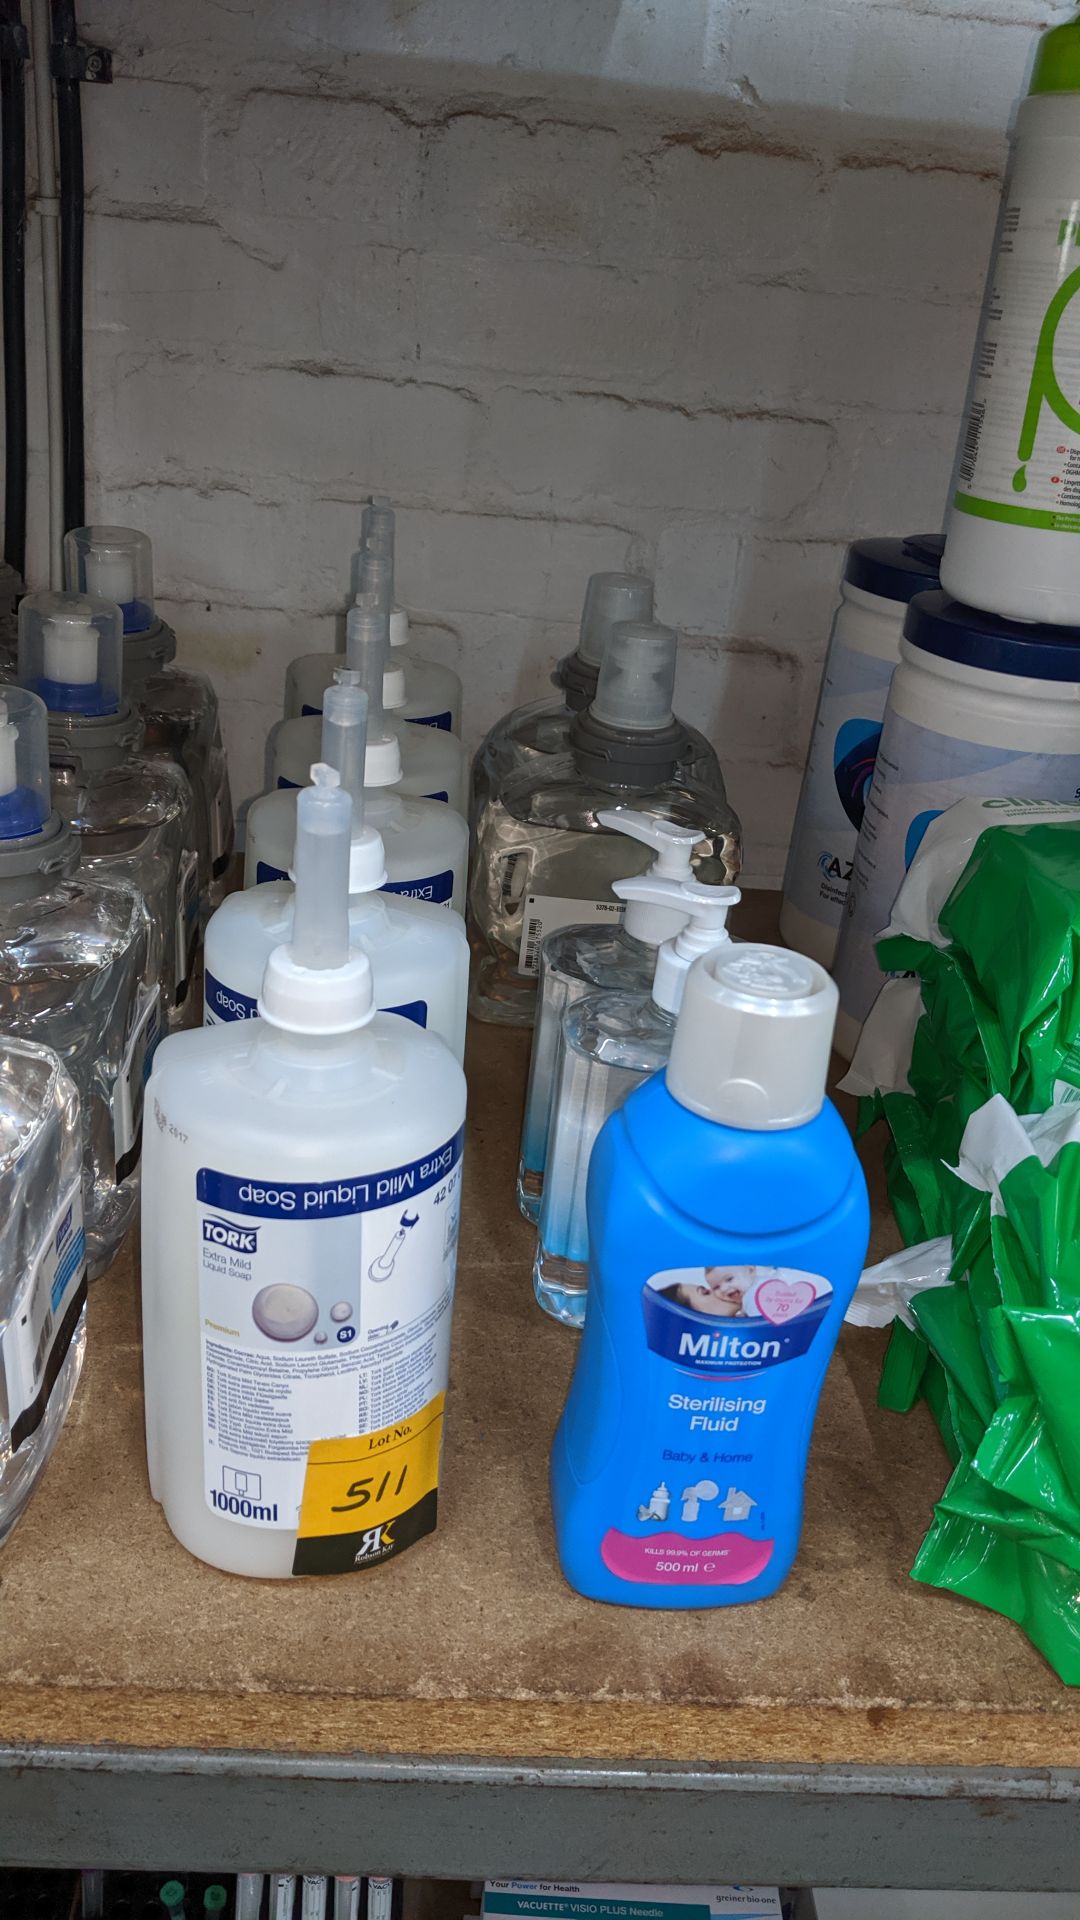 10 assorted sized bottles of sterilizing fluid, liquid soap & similar. This is one of a large number